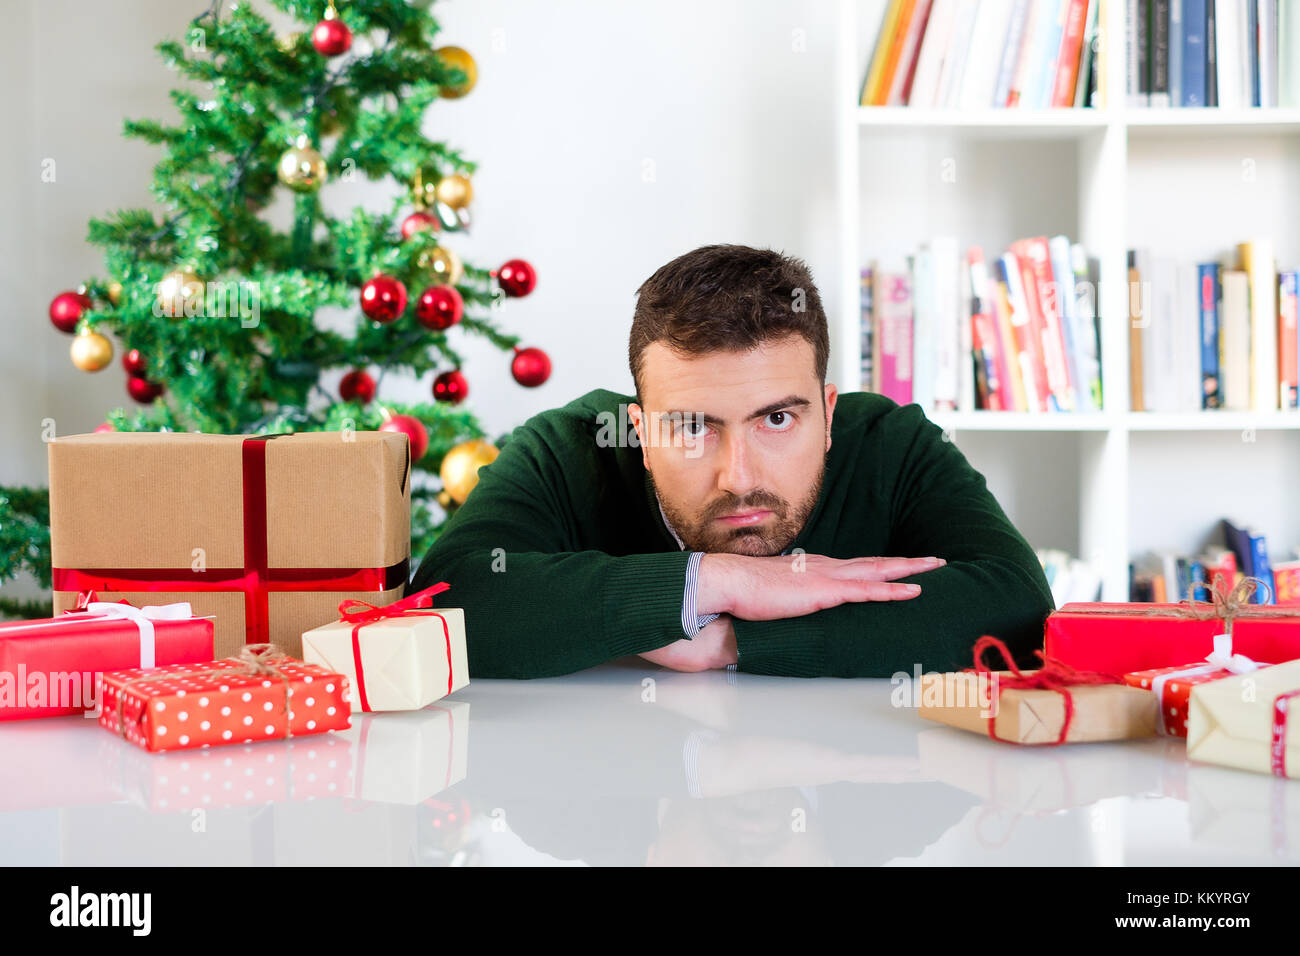 Man frustrated by the christmas presents , negative emotion Stock Photo